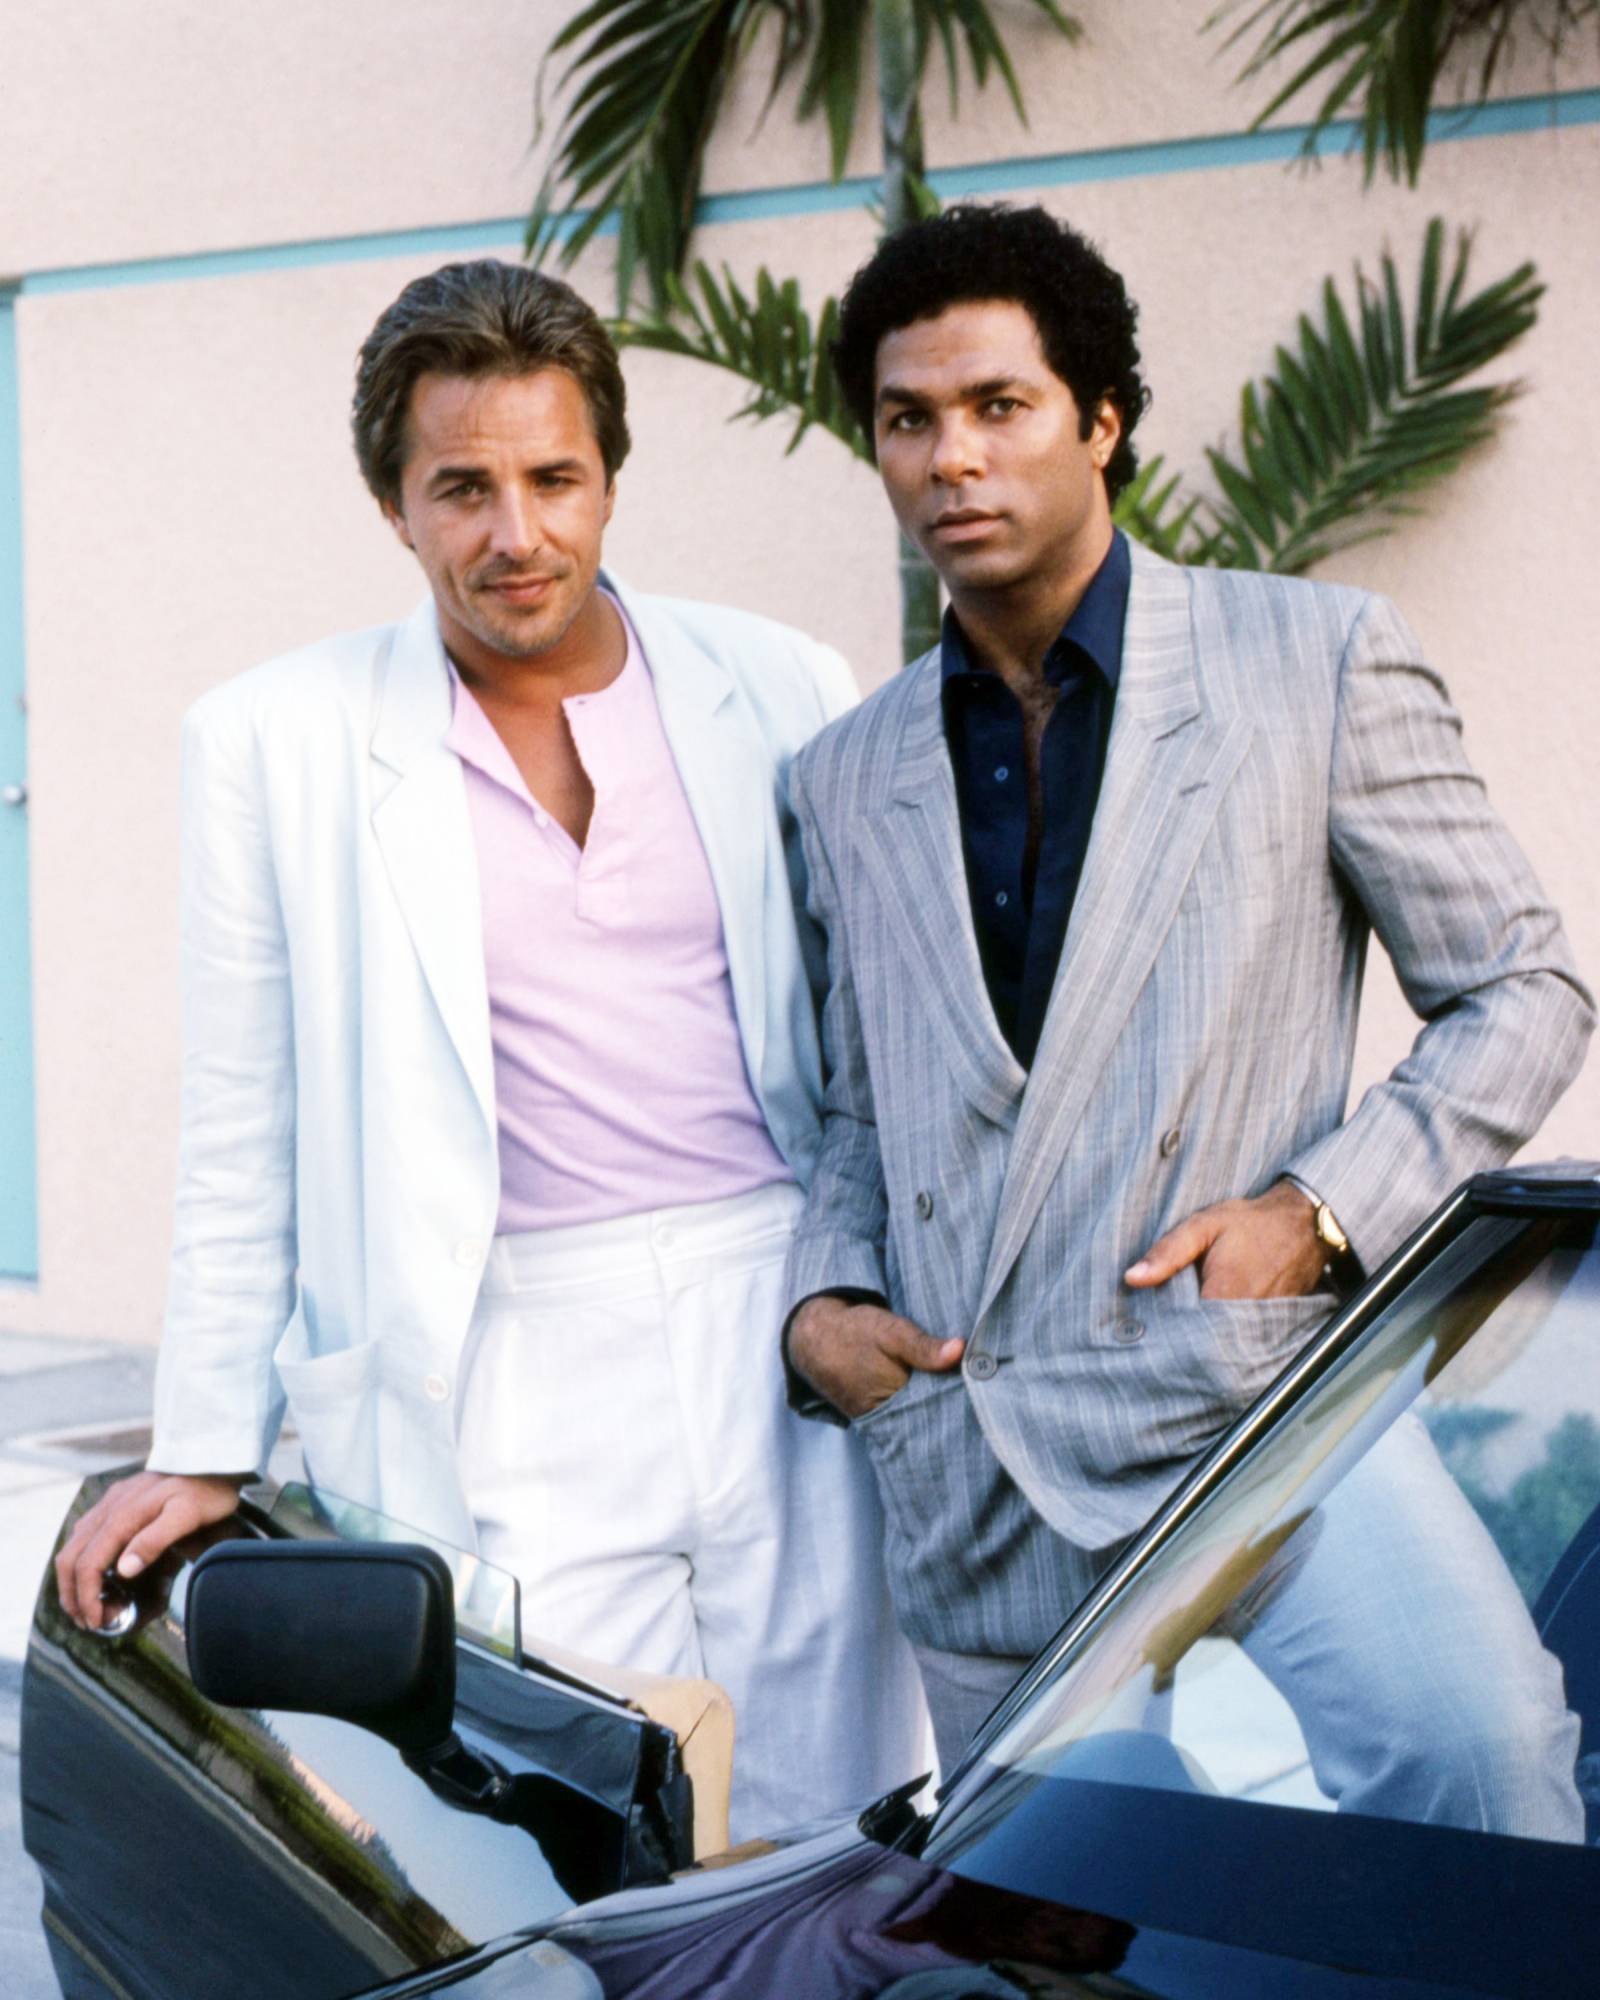 Miami Vice /(Fot. Getty Images)